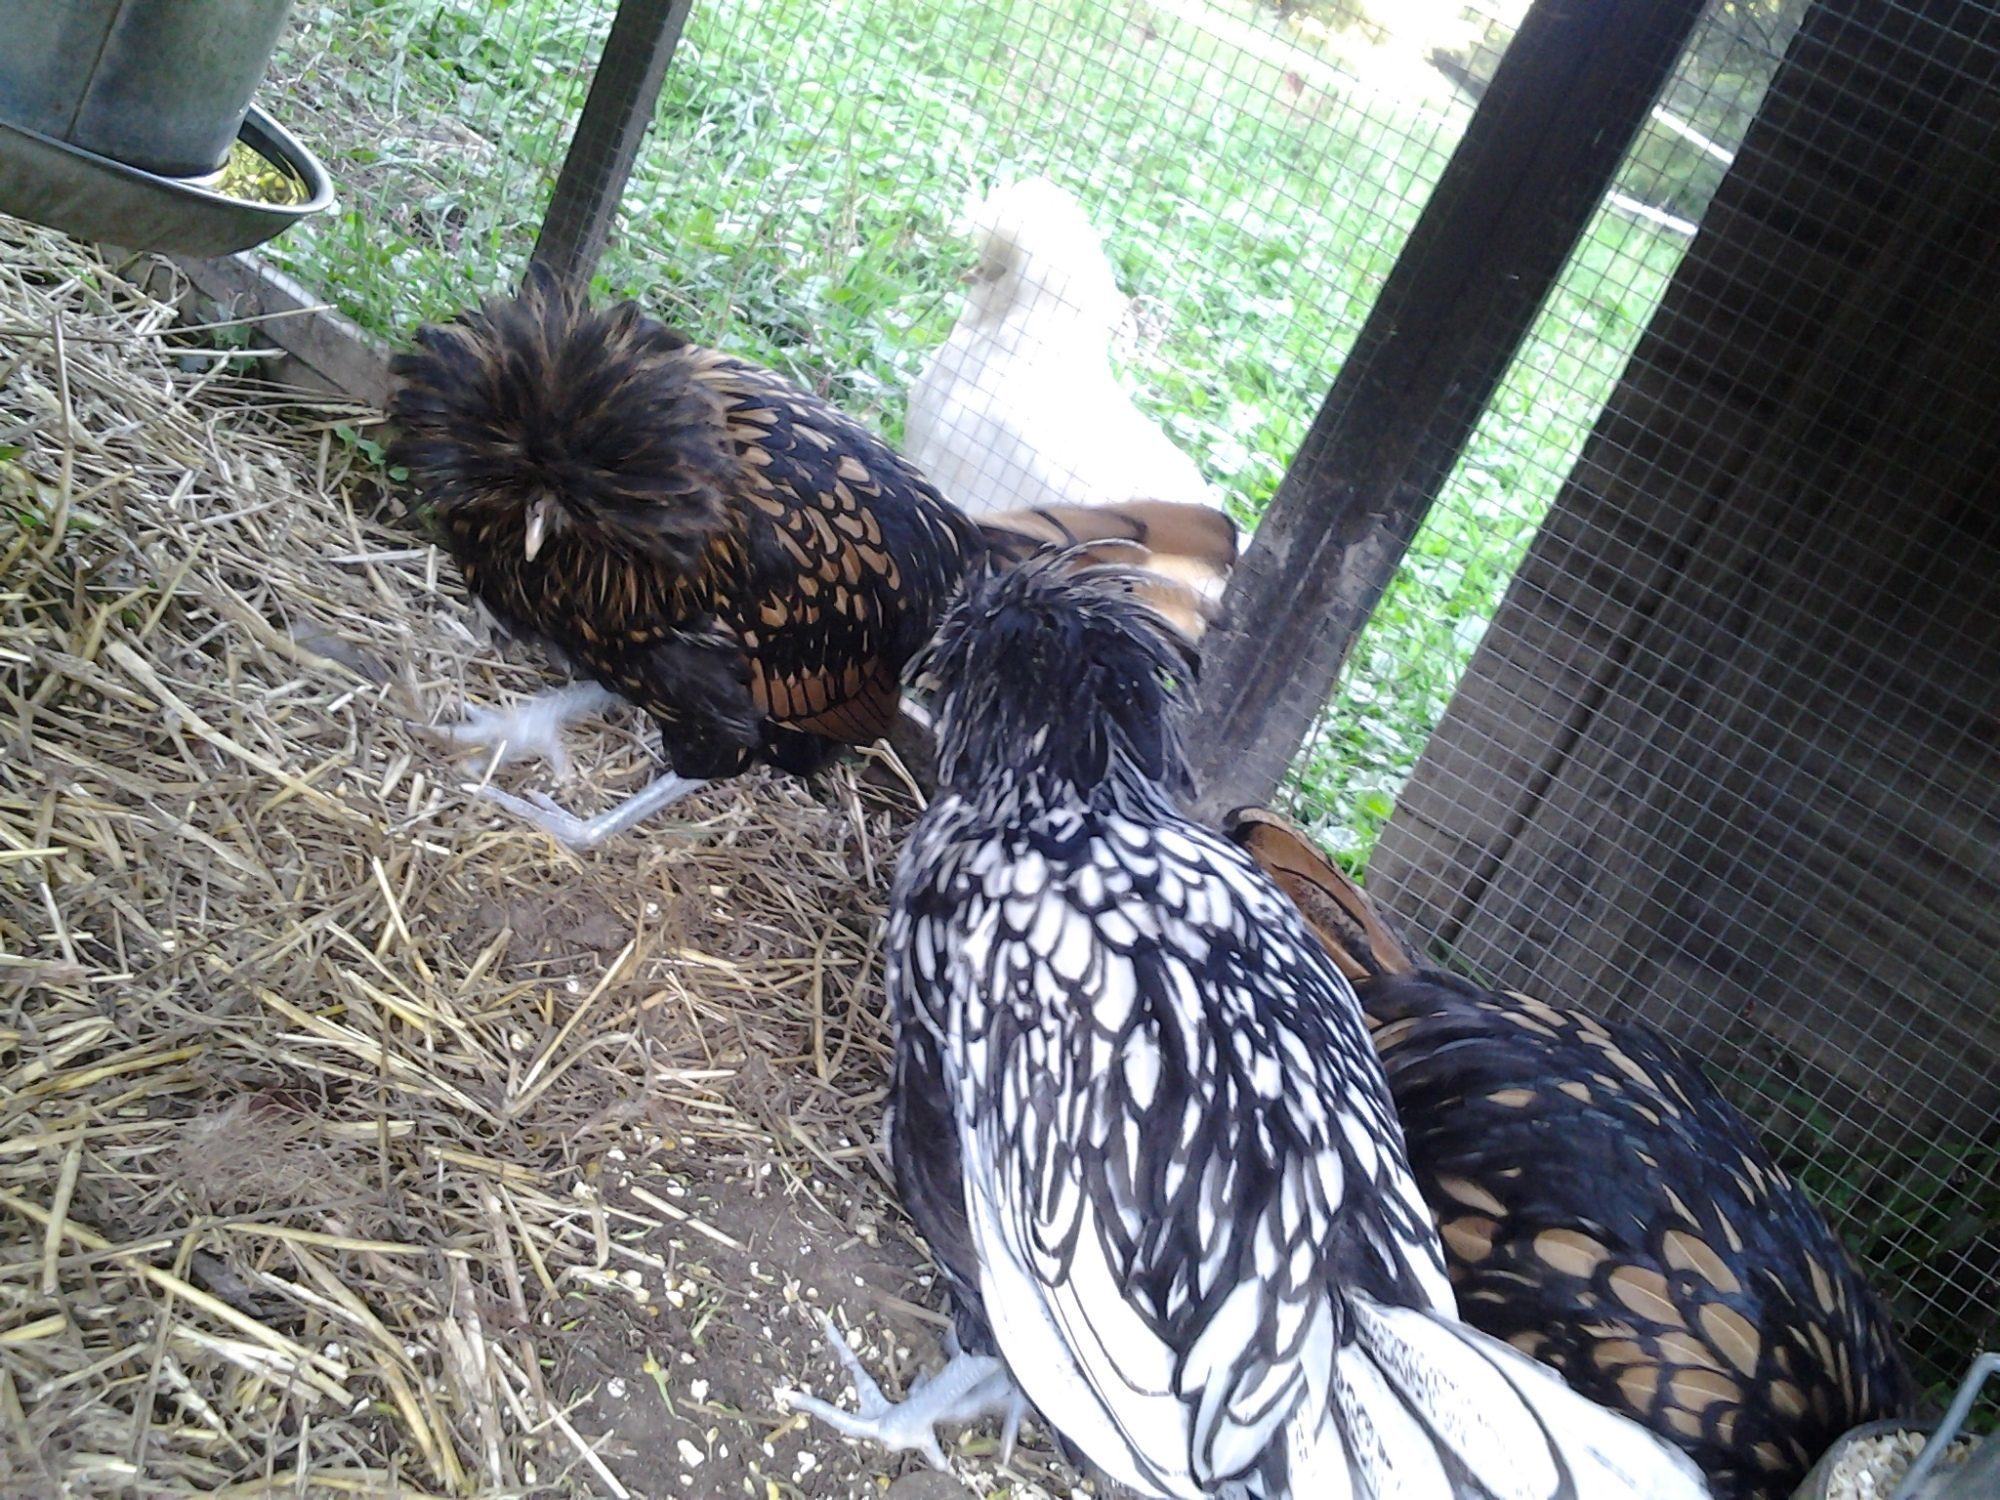 3 of the 4 Polish Hens (4mo old)